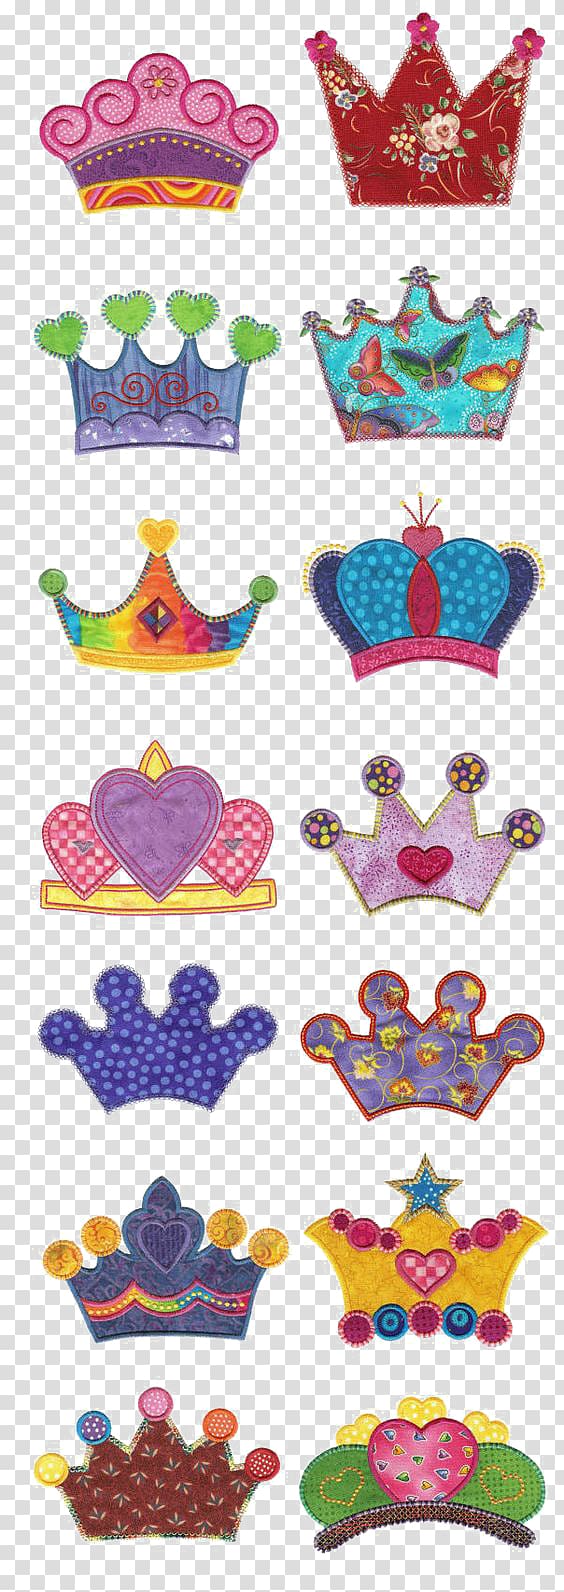 Machine embroidery Appliquxe9 Pattern, crown transparent background PNG clipart